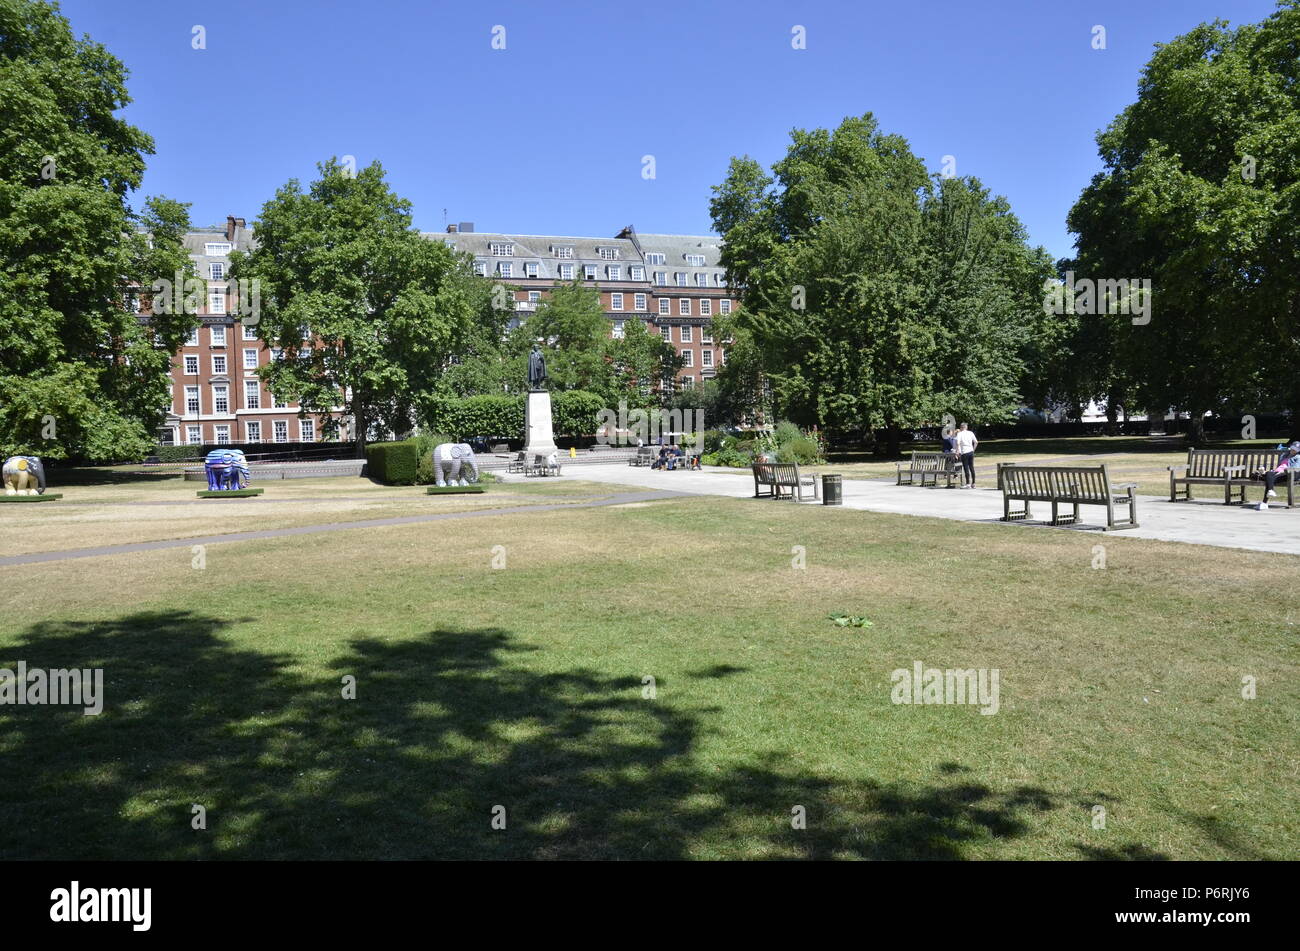 Elephant sculptures in Grosvenor Square, Mayfair London as part of the 2018 Elephant parade to highlight the plight of Asian elephants Stock Photo